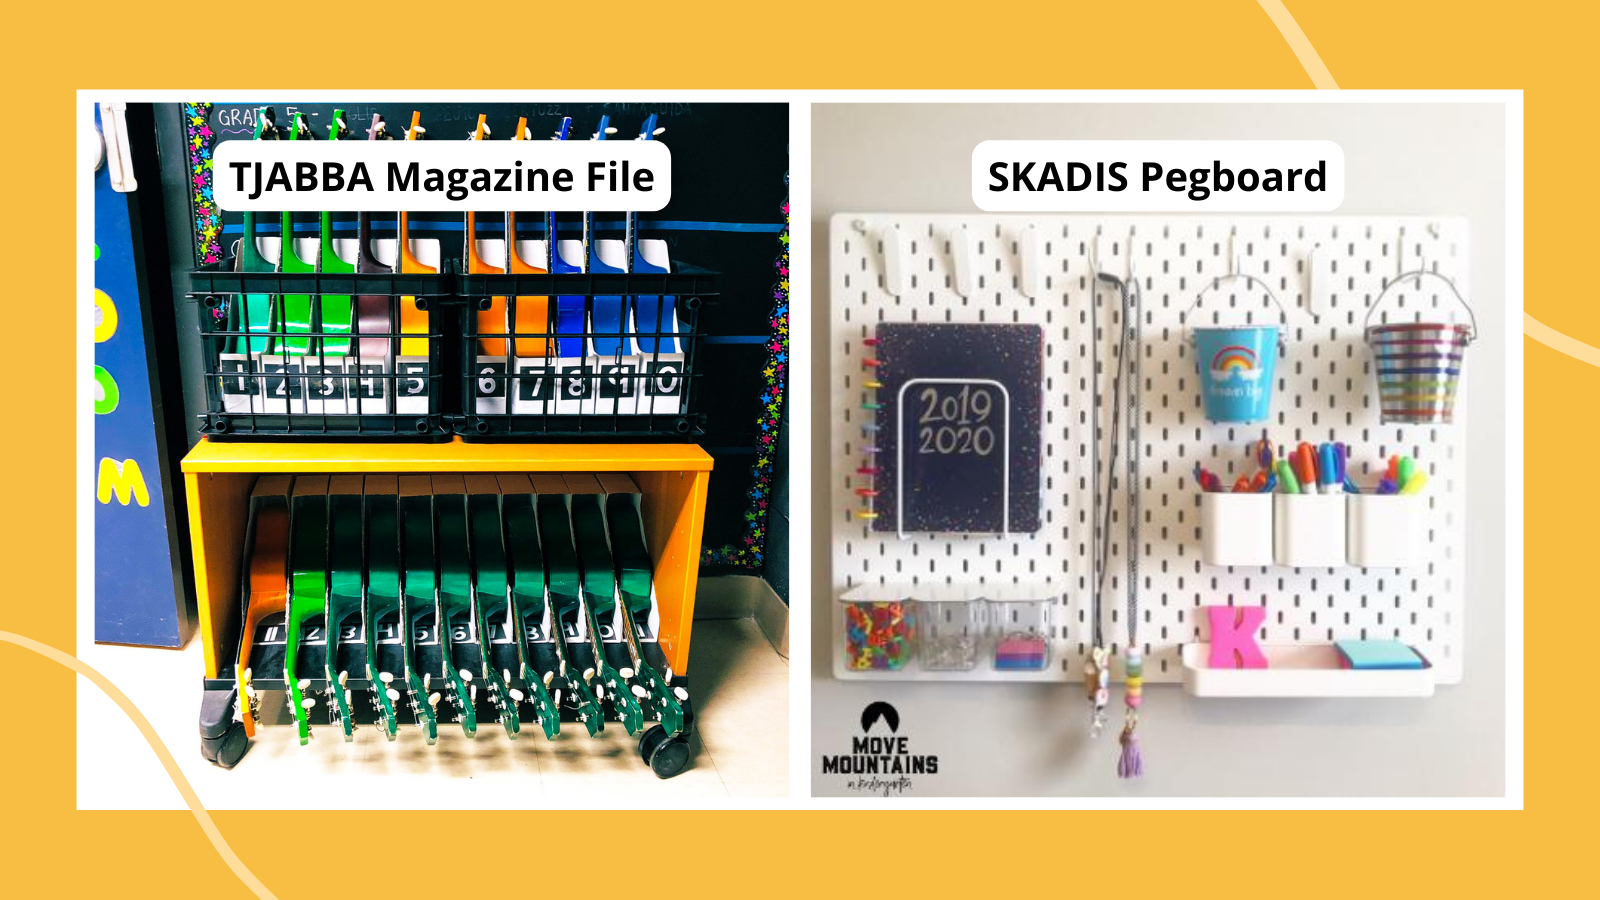 Examples of IKEA products in classrooms including SKADIS Pegboard and TJABBA magazine files for storing ukuleles.